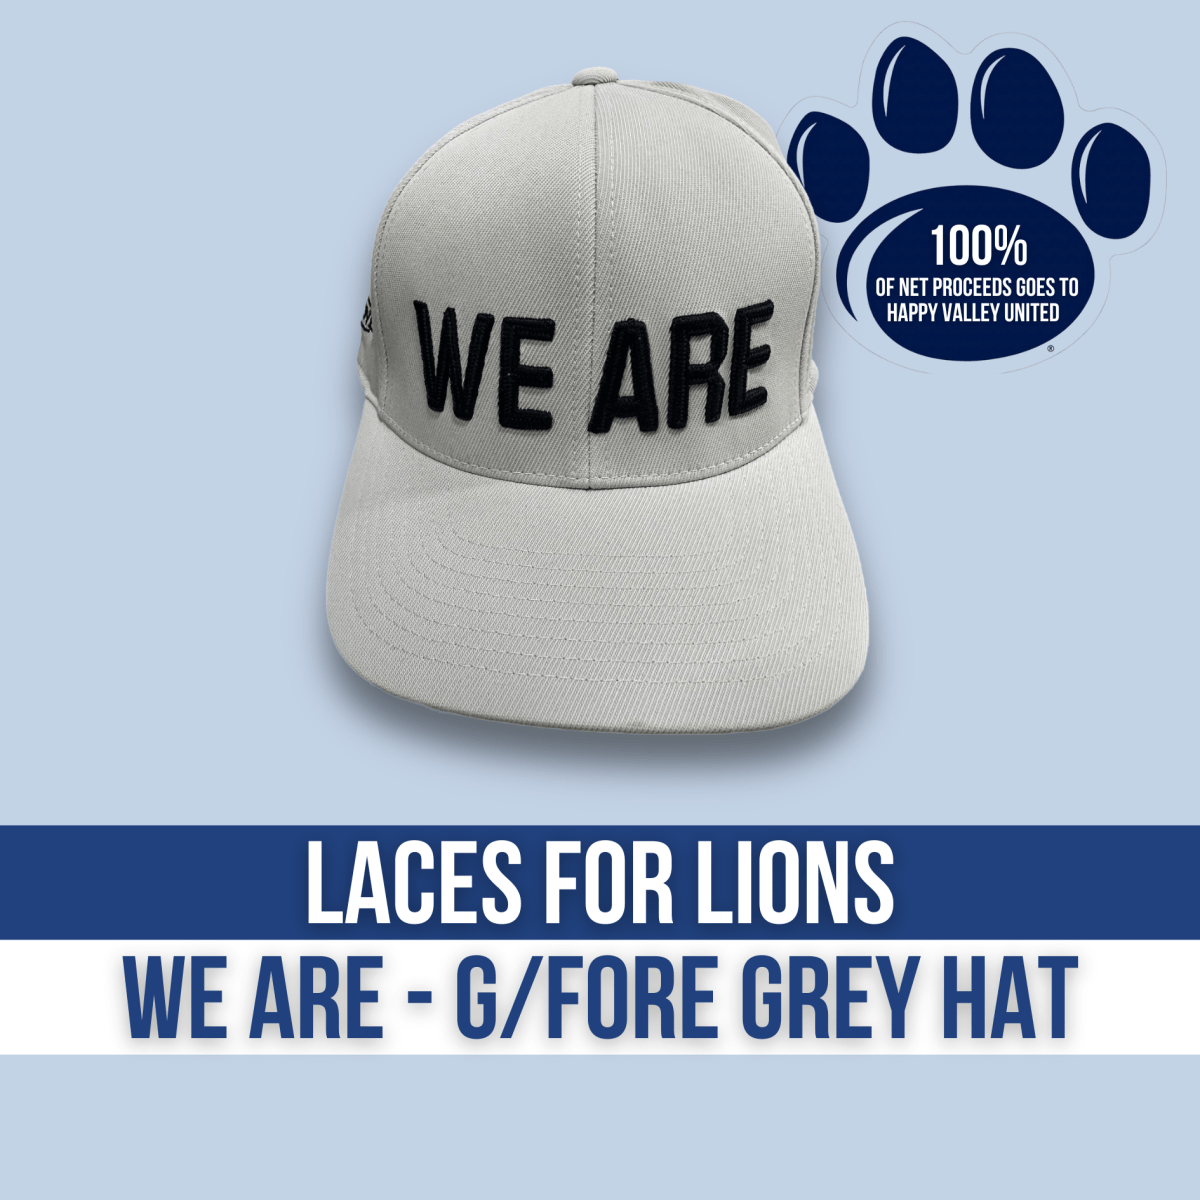 Laces for Lions Grey "WE ARE" Happy Valley United G/FORE 110 Hat - sneaker - Hats - G/FORE - Jawns on Fire